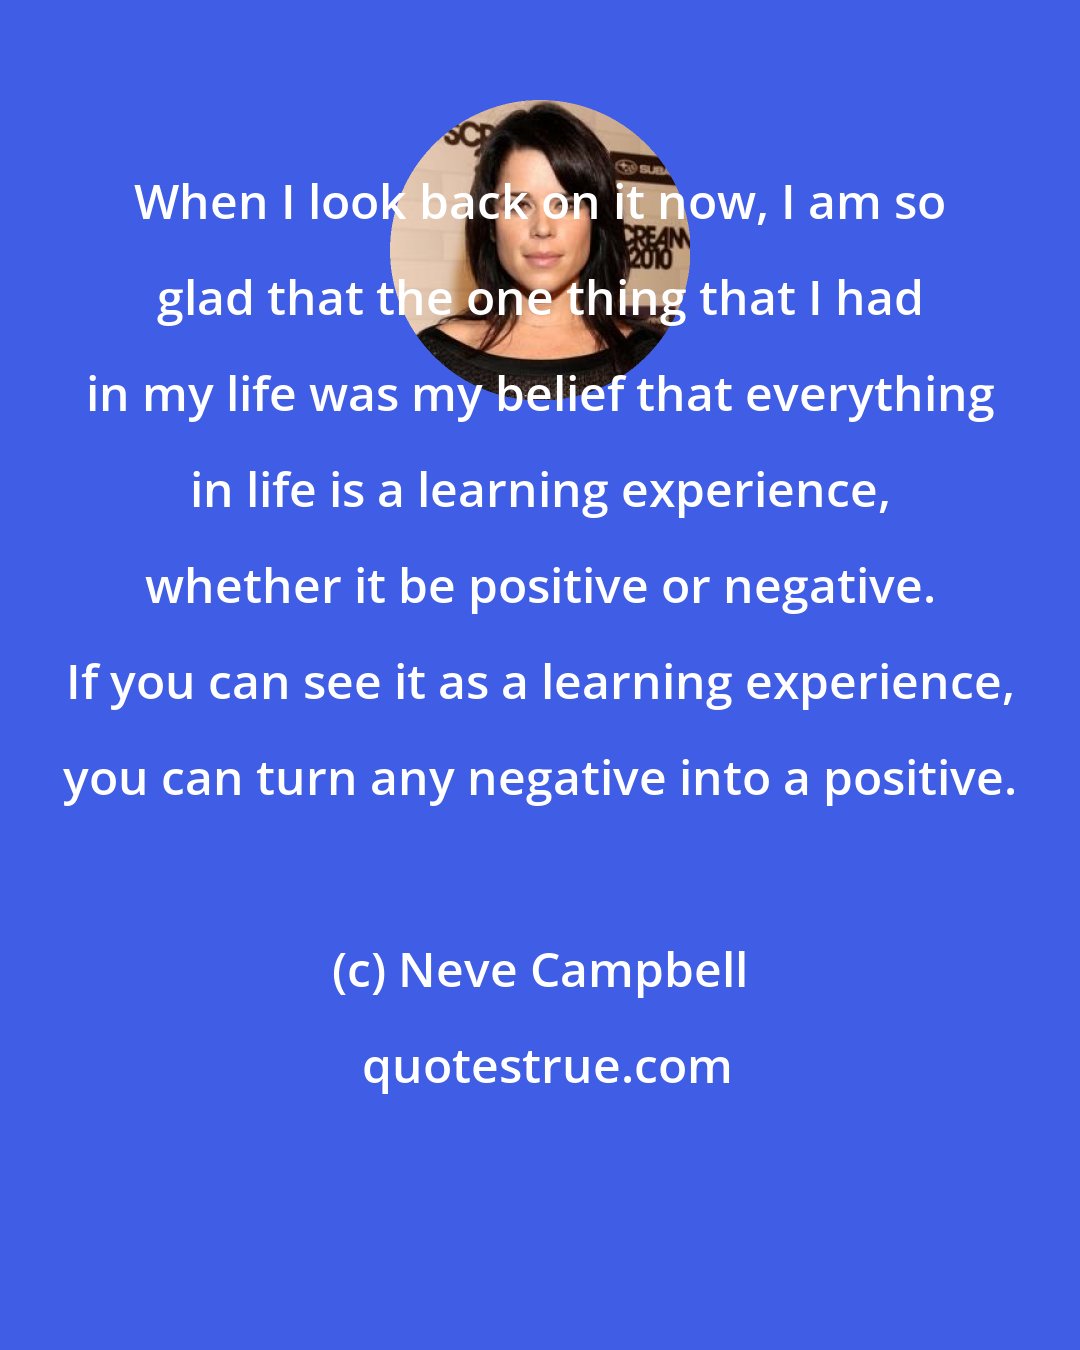 Neve Campbell: When I look back on it now, I am so glad that the one thing that I had in my life was my belief that everything in life is a learning experience, whether it be positive or negative. If you can see it as a learning experience, you can turn any negative into a positive.